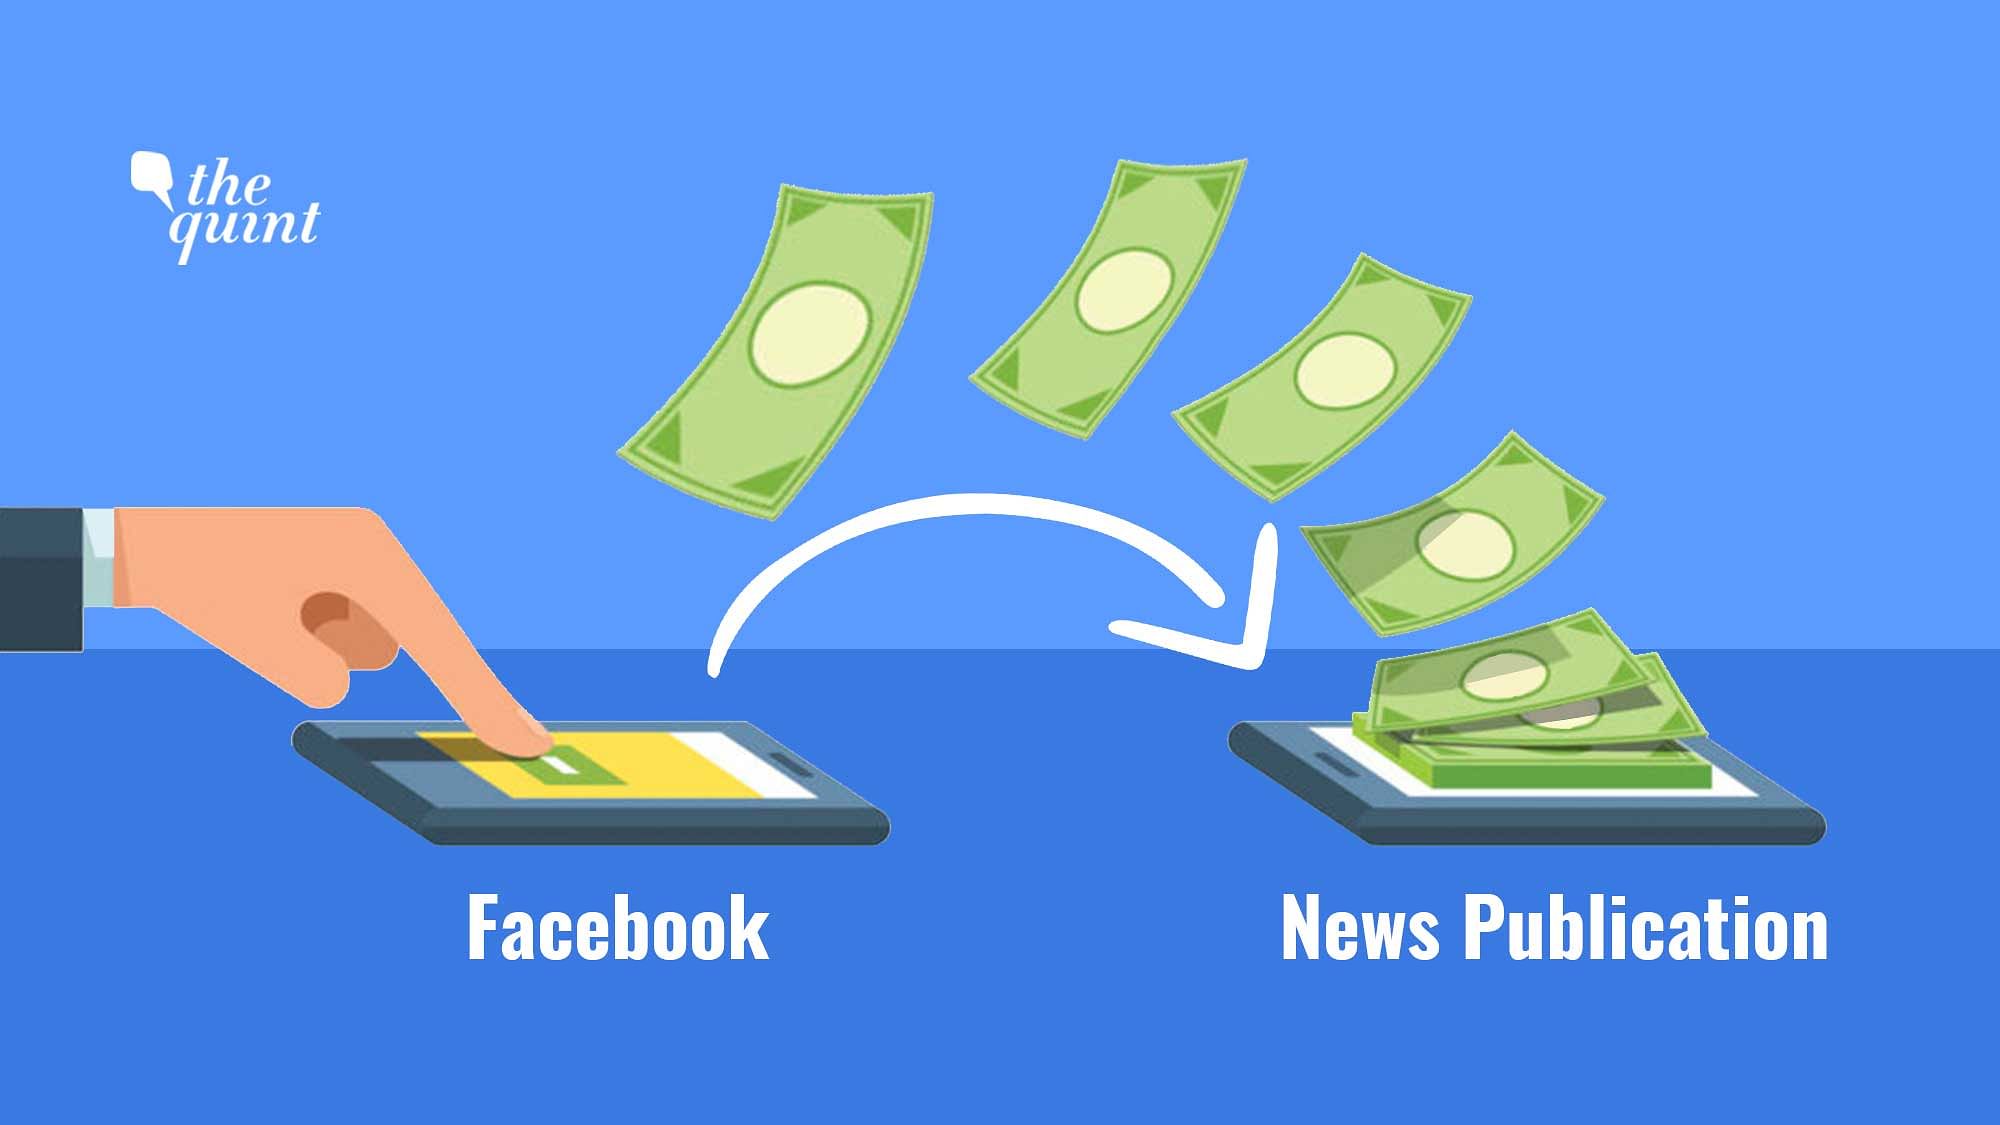 Facebook recently blocked news in Australia over the issue of having to pay news companies for sharing their links.&nbsp;